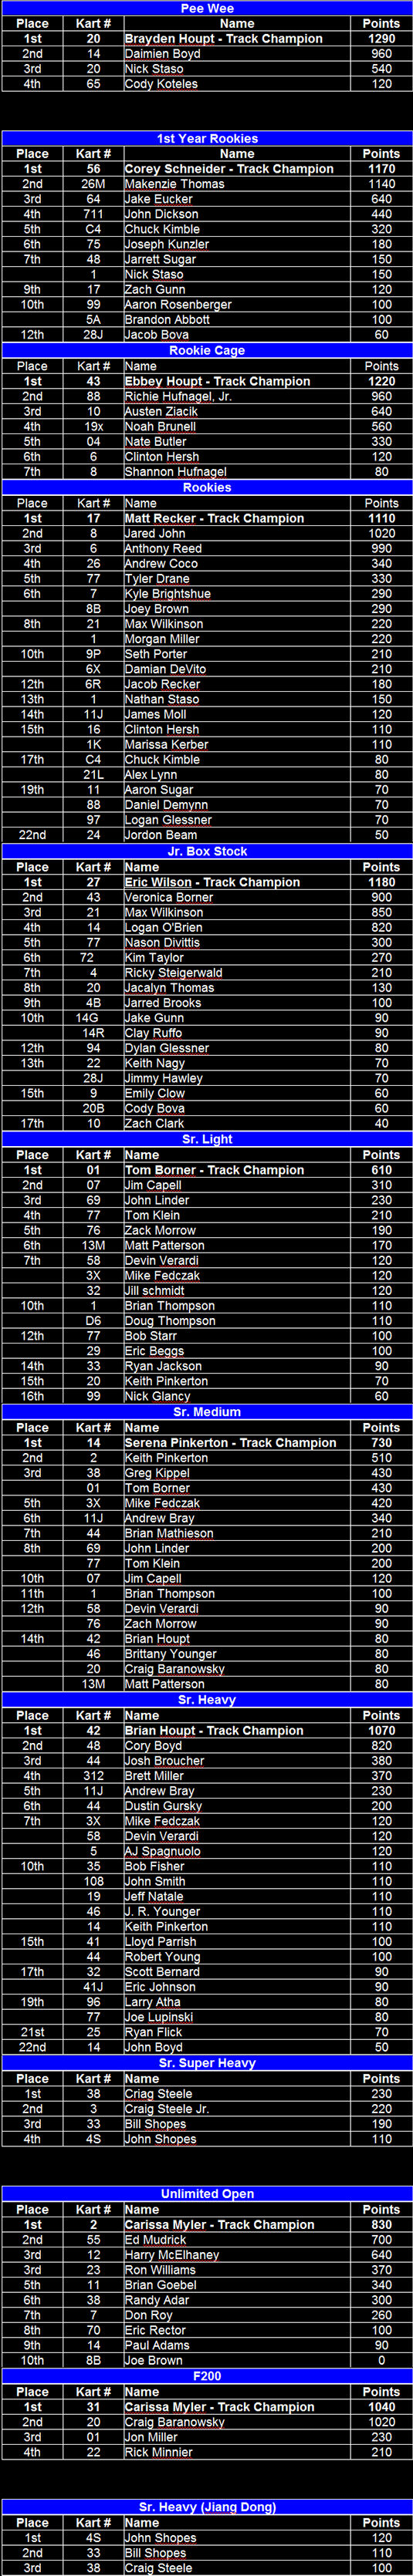 Naugle Speedway 2008 Final Point Standings